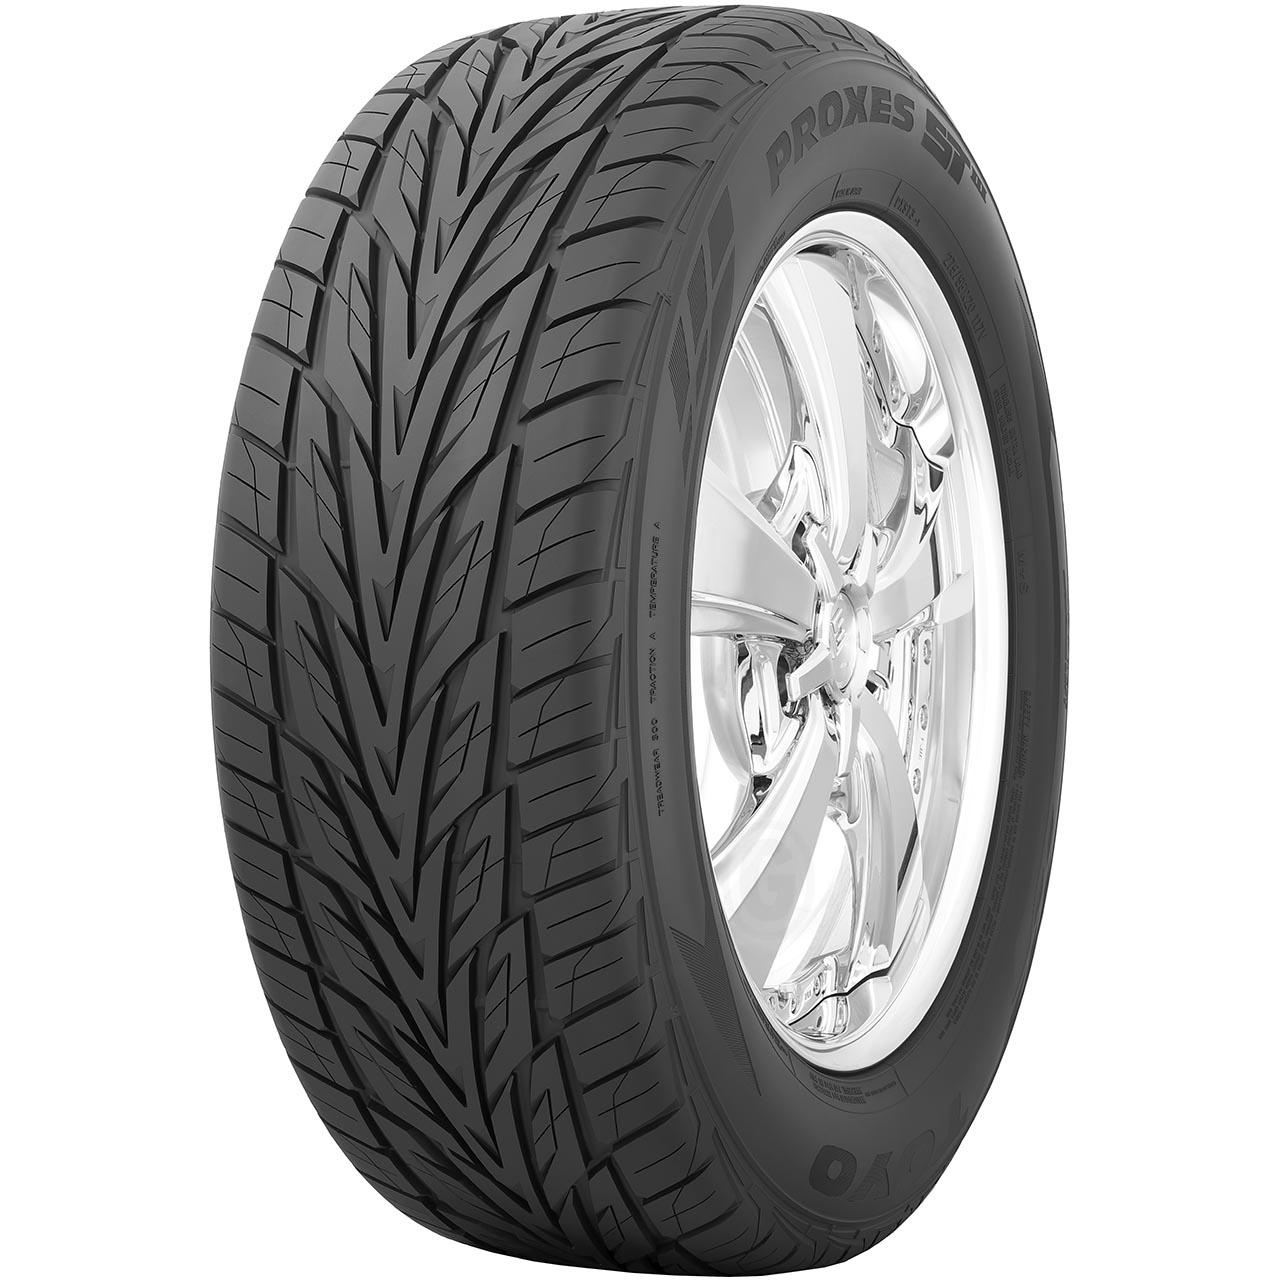 TOYO PROXES S/T III 215/65R16 102V